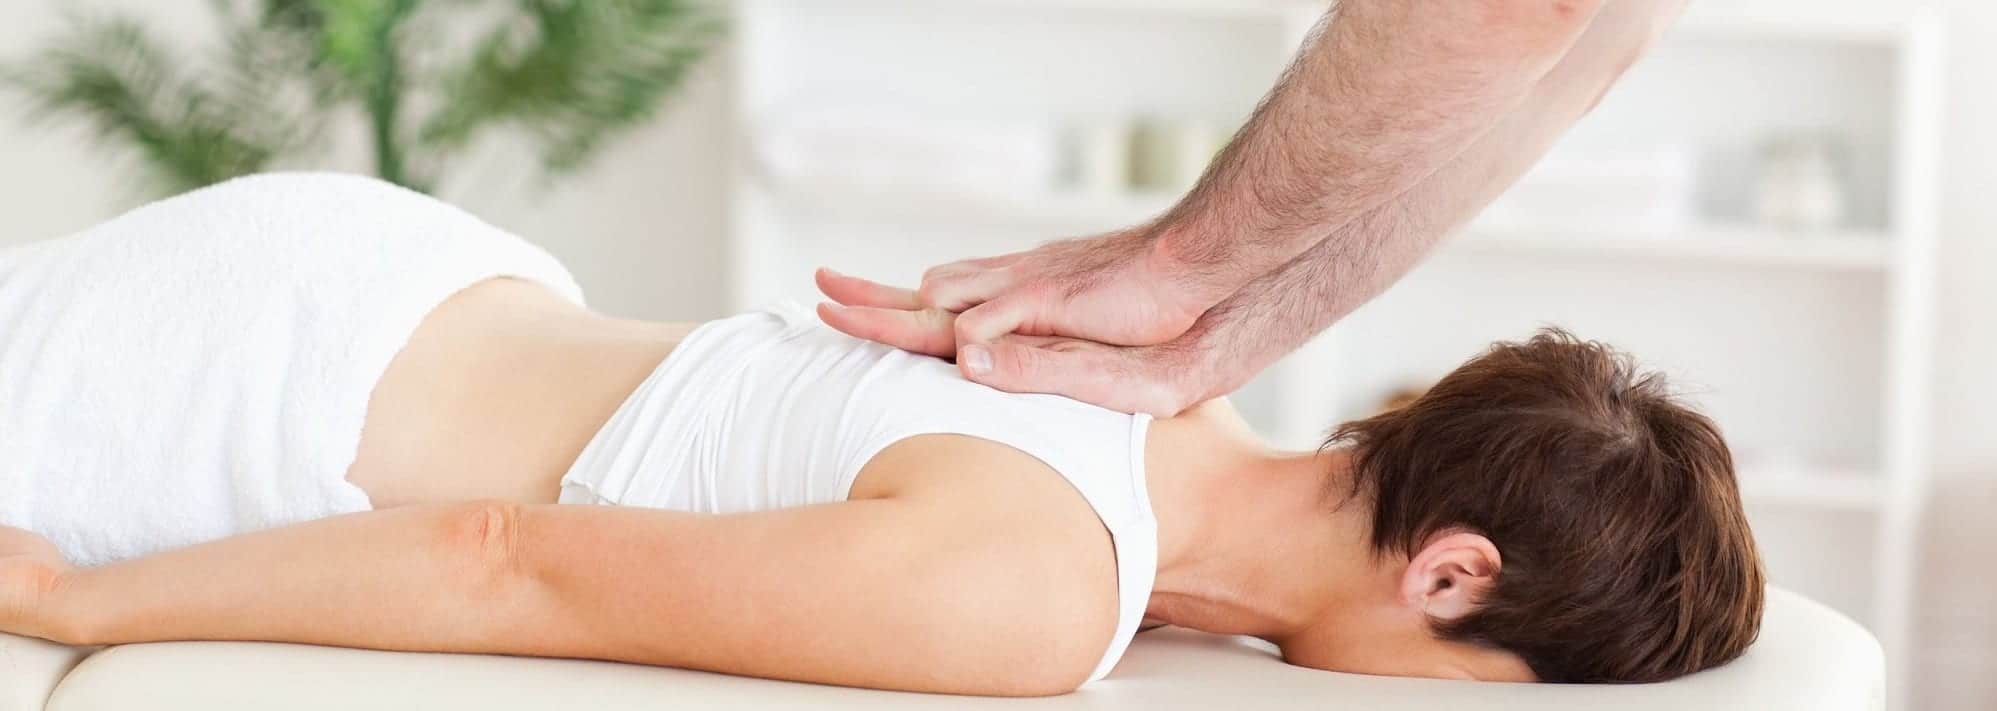 Fort Lauderdale Chiropractic Manipulative Therapy | Chiropractic  Adjustments Oakland Park